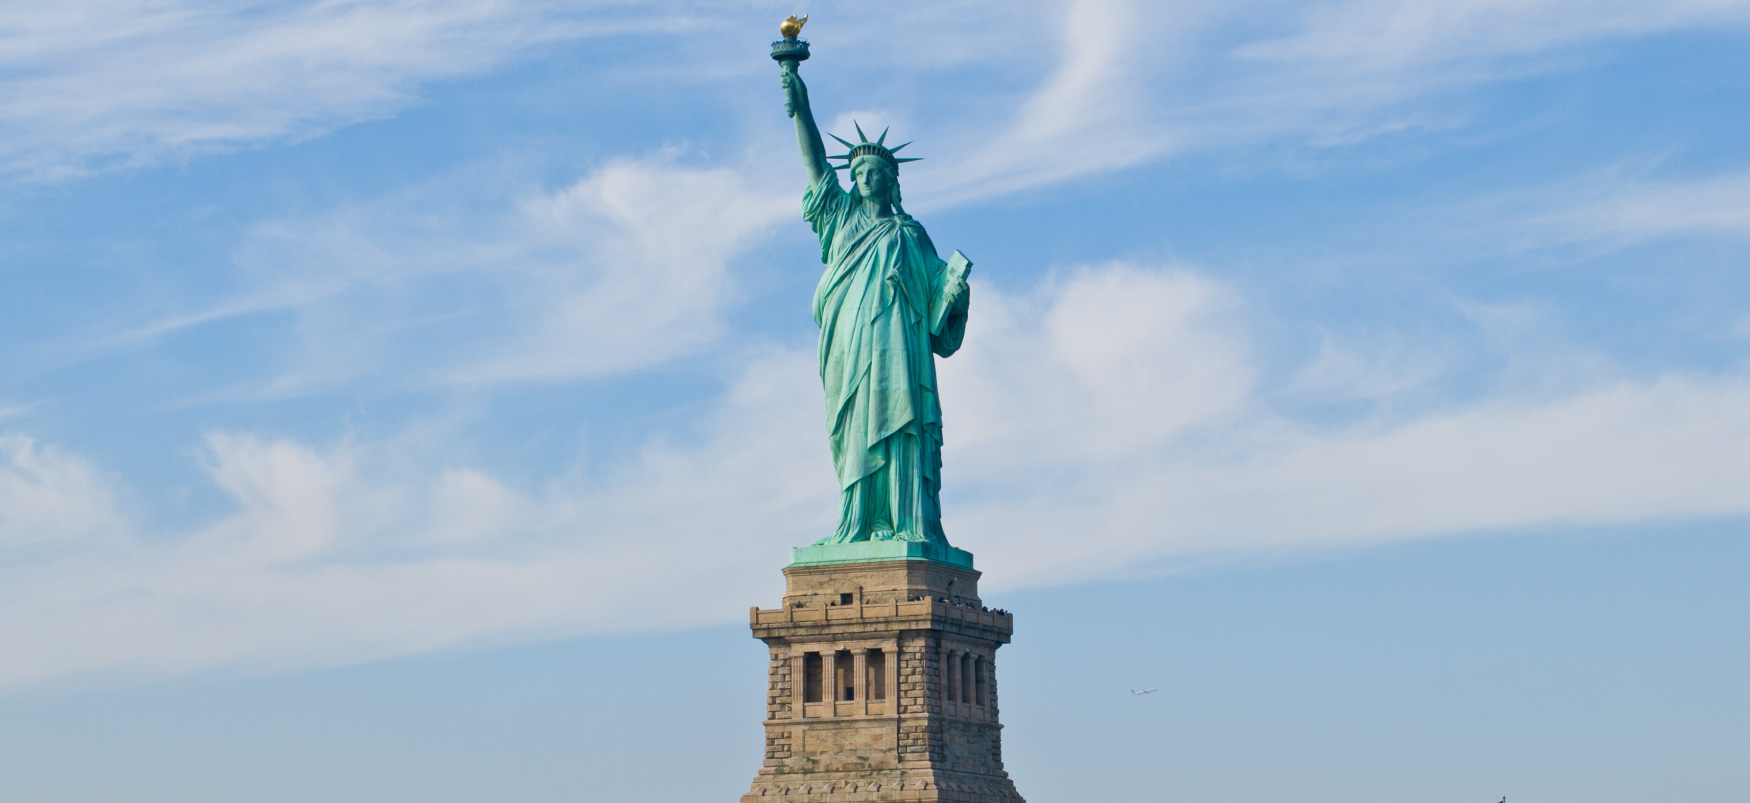 A photograph of the Statue of Liberty.